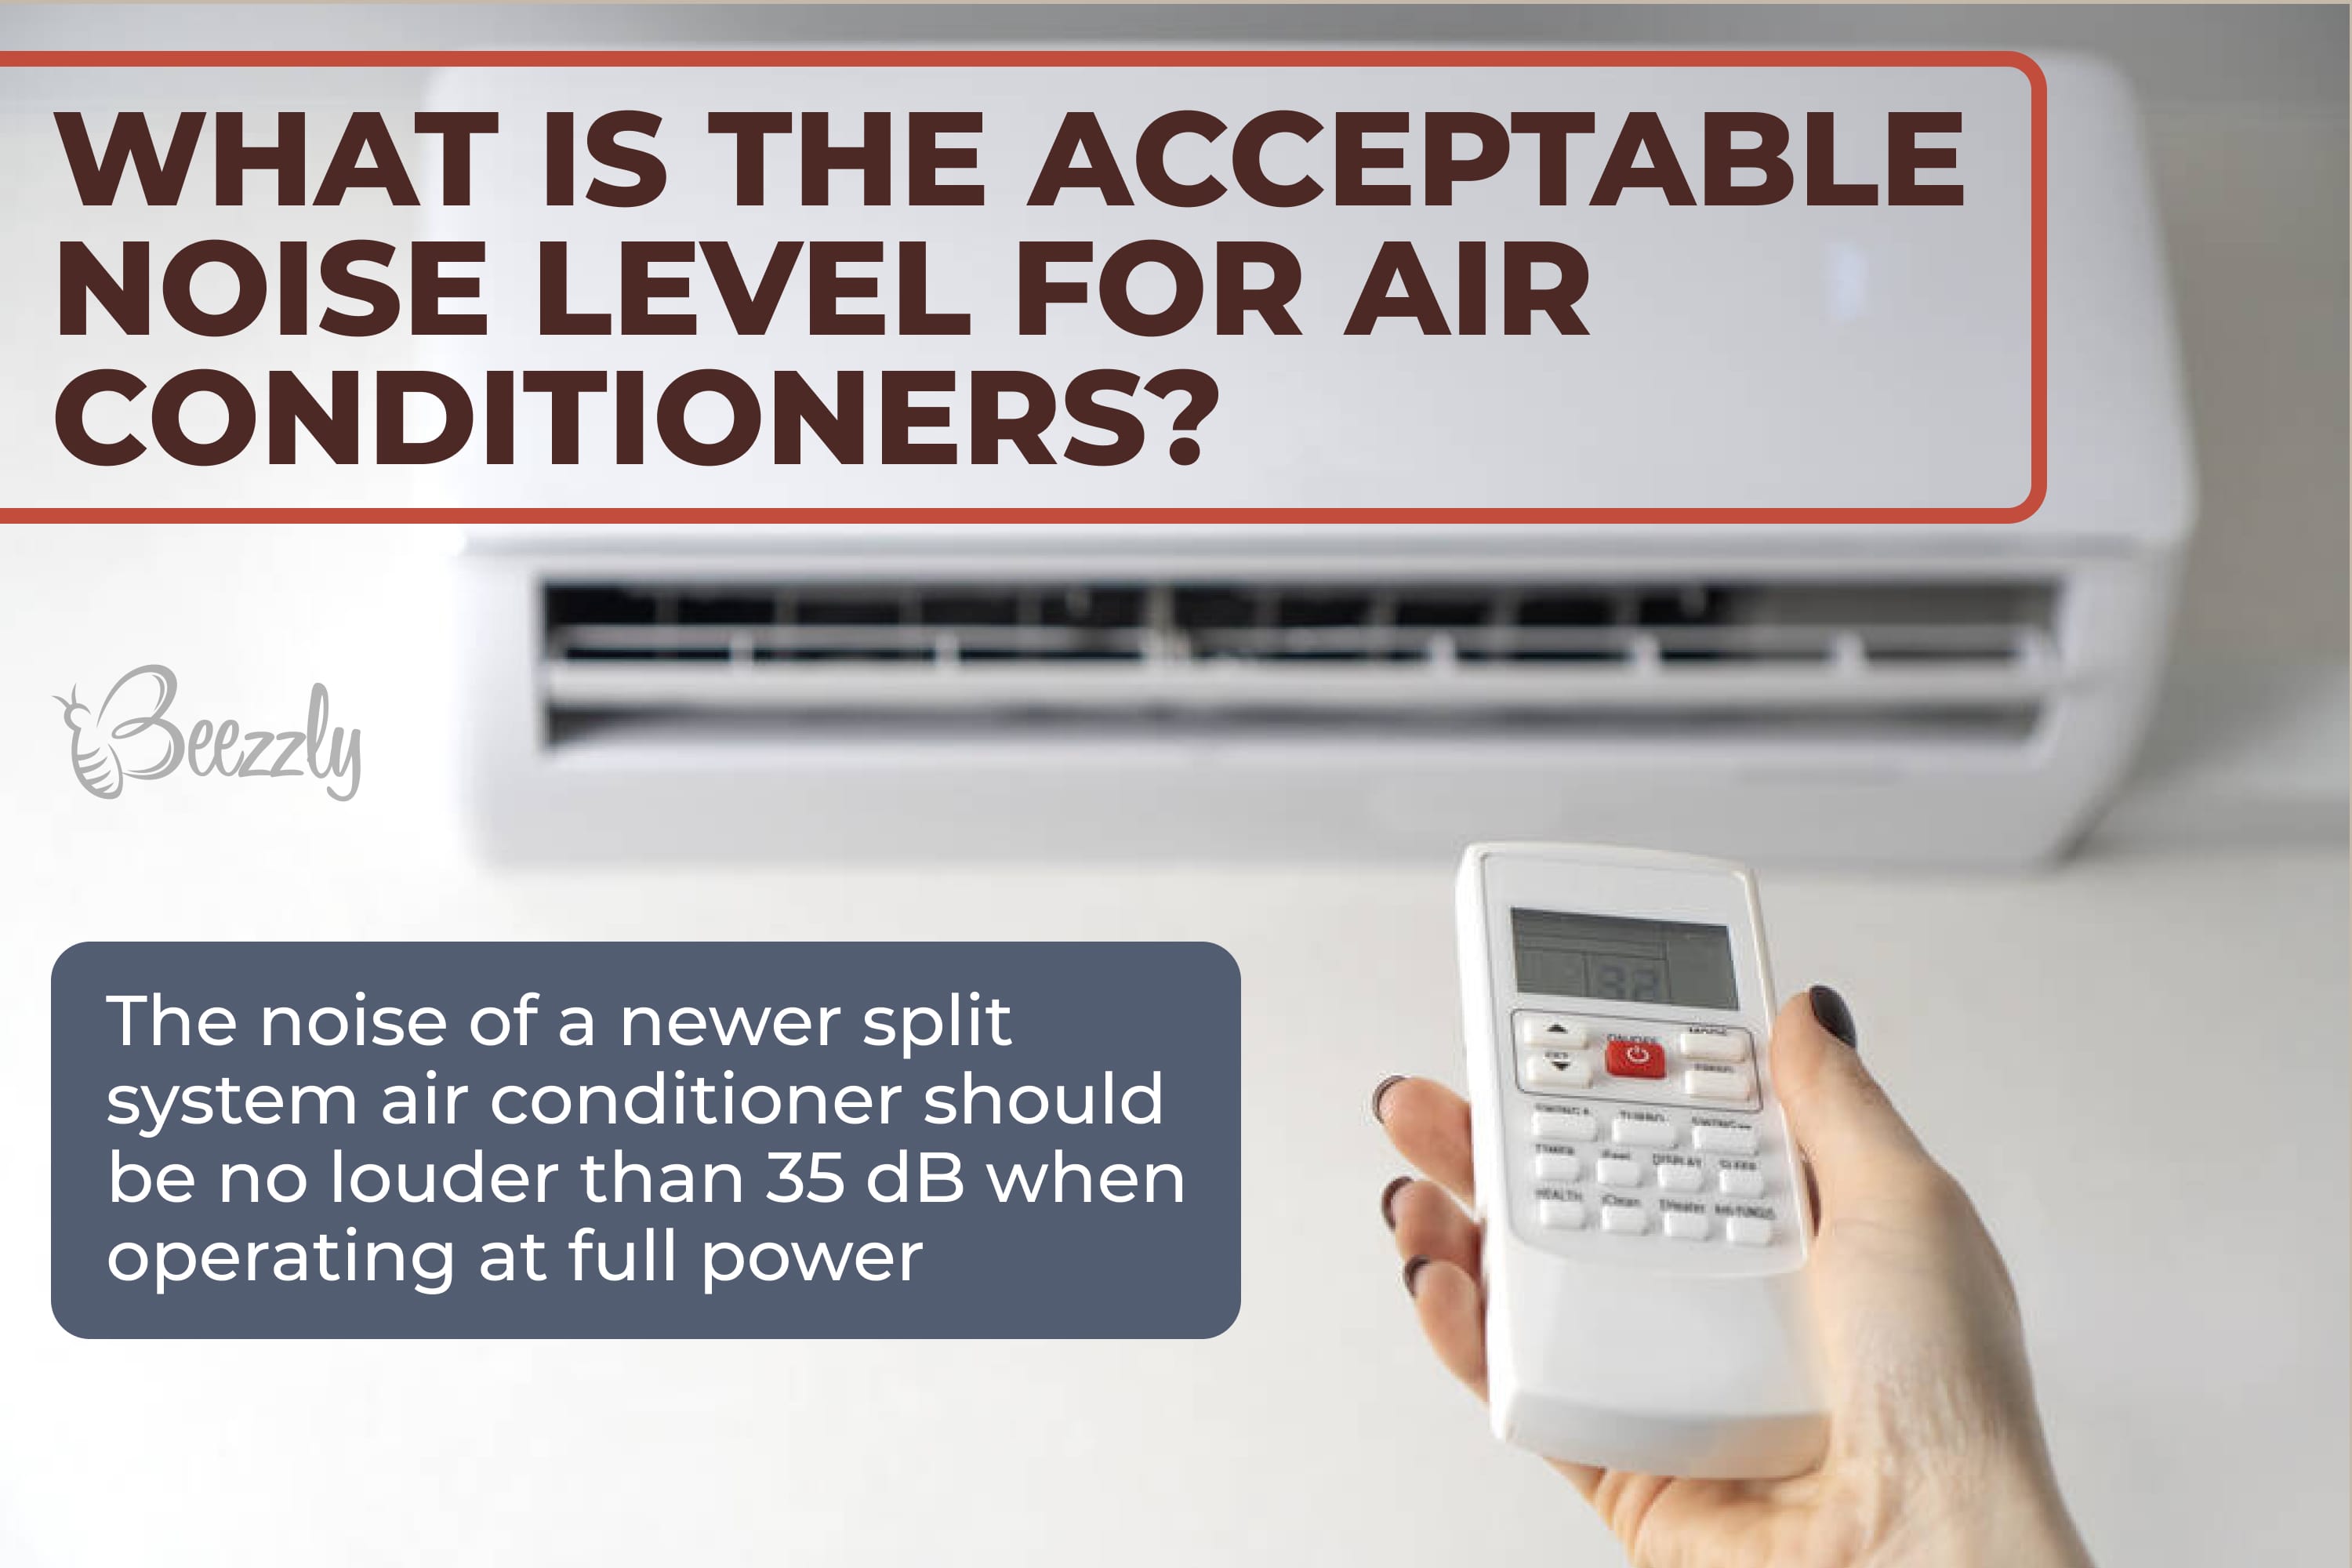 What is the acceptable noise level for air conditioners